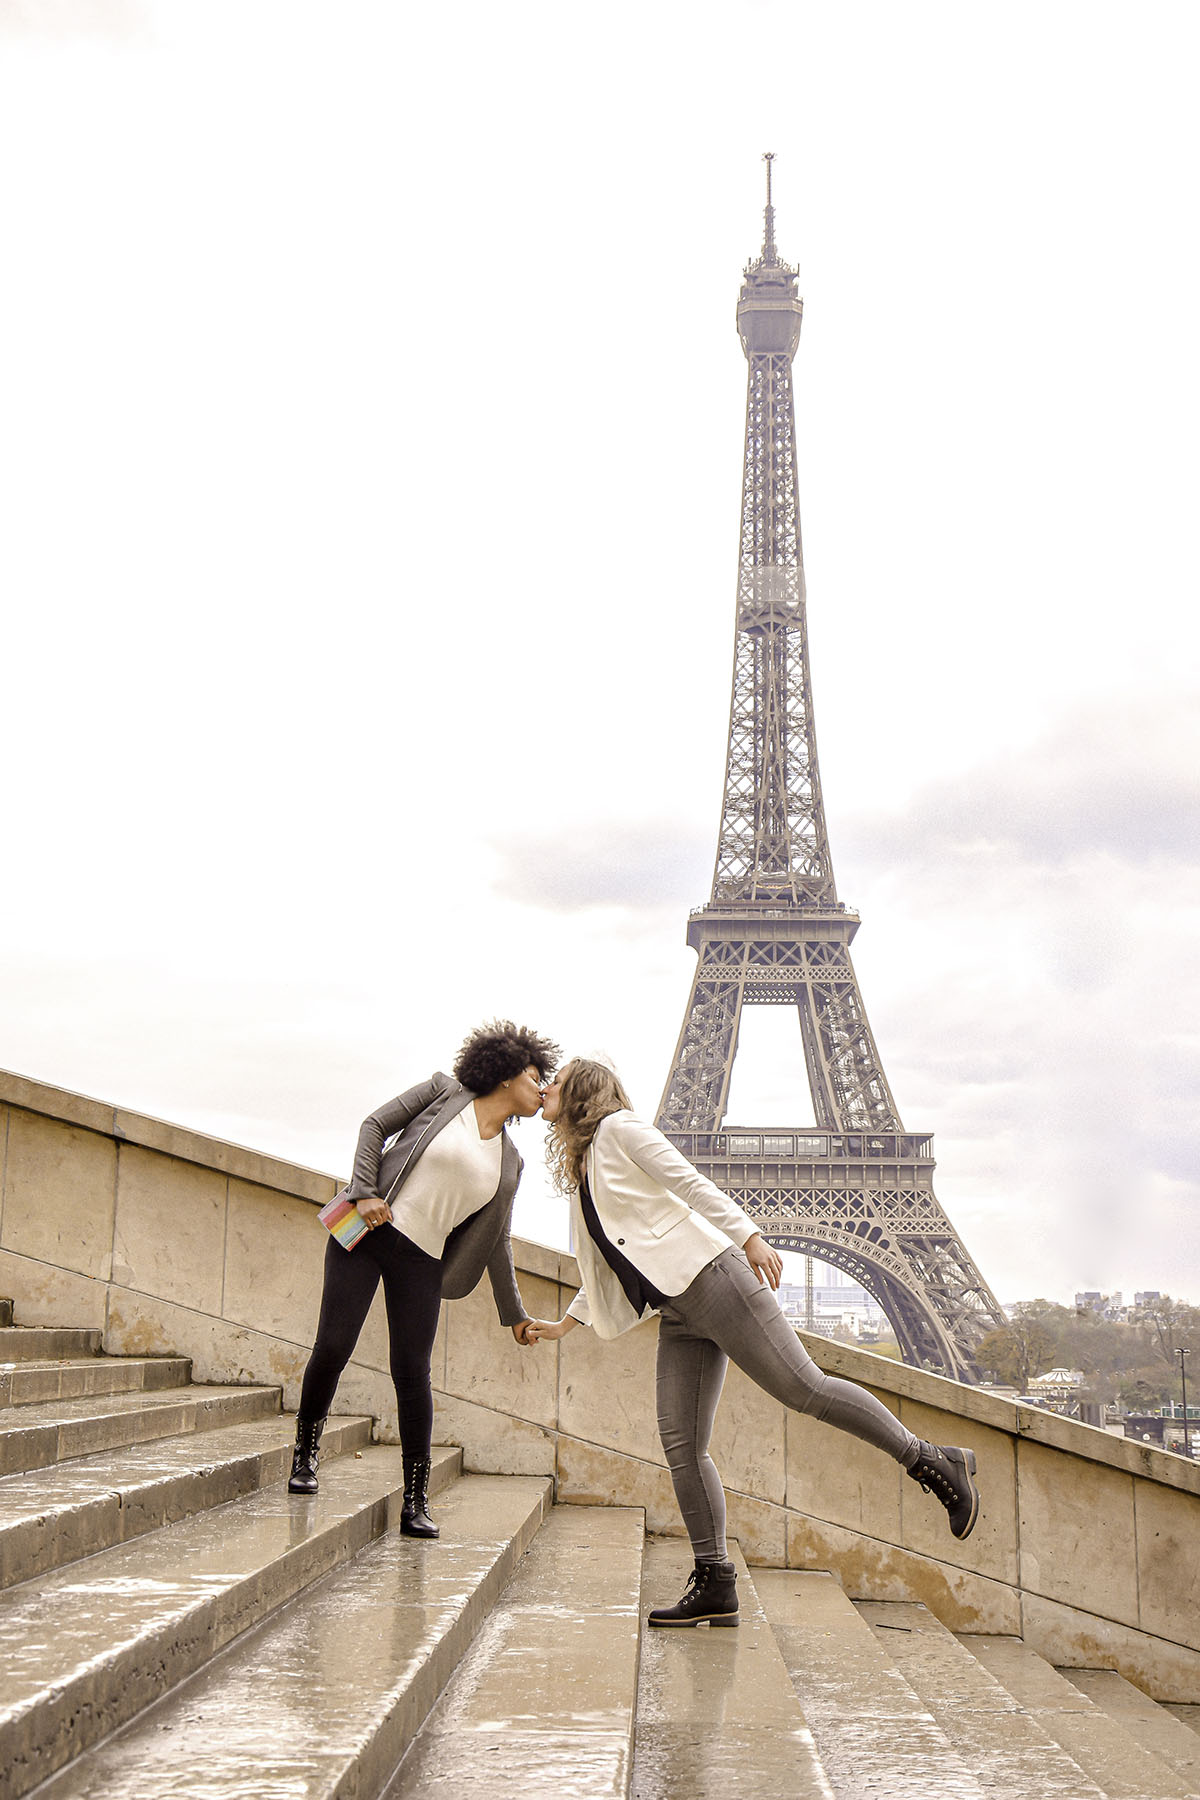 We love the adorable way these two marriers announced their wedding day two brides Paris Eiffel Tower family son wedding announcement engaged